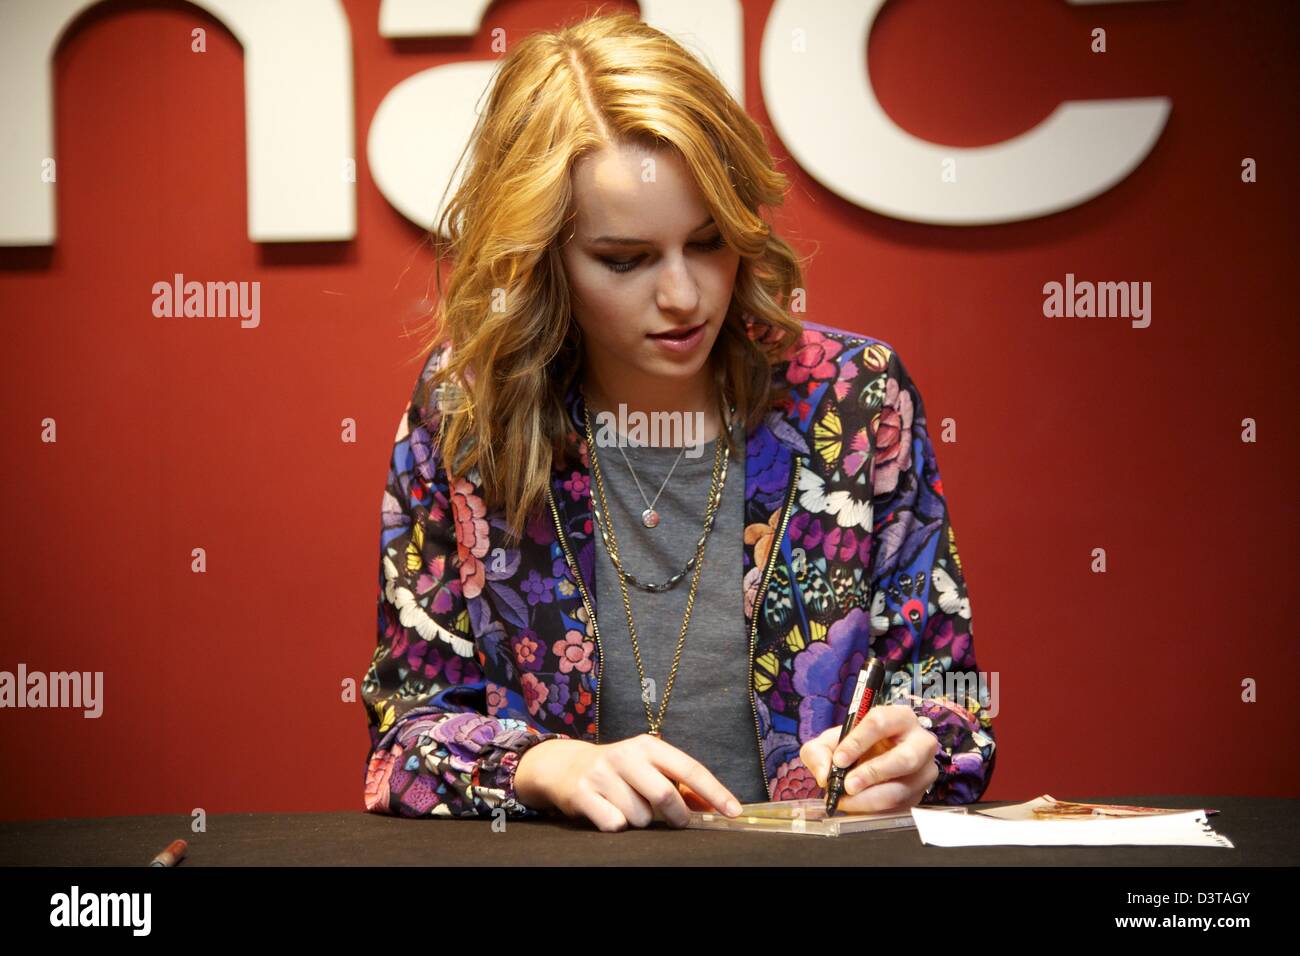 Madrid, Spain. 24th Feb, 2013.  Singer Bridgit Mendler attends a meeting with fans at the FNAC store on February 24, 2013 in Madrid, Spain. (Credit Image: Credit:  Jack Abuin/ZUMAPRESS.com/Alamy Live News) Stock Photo